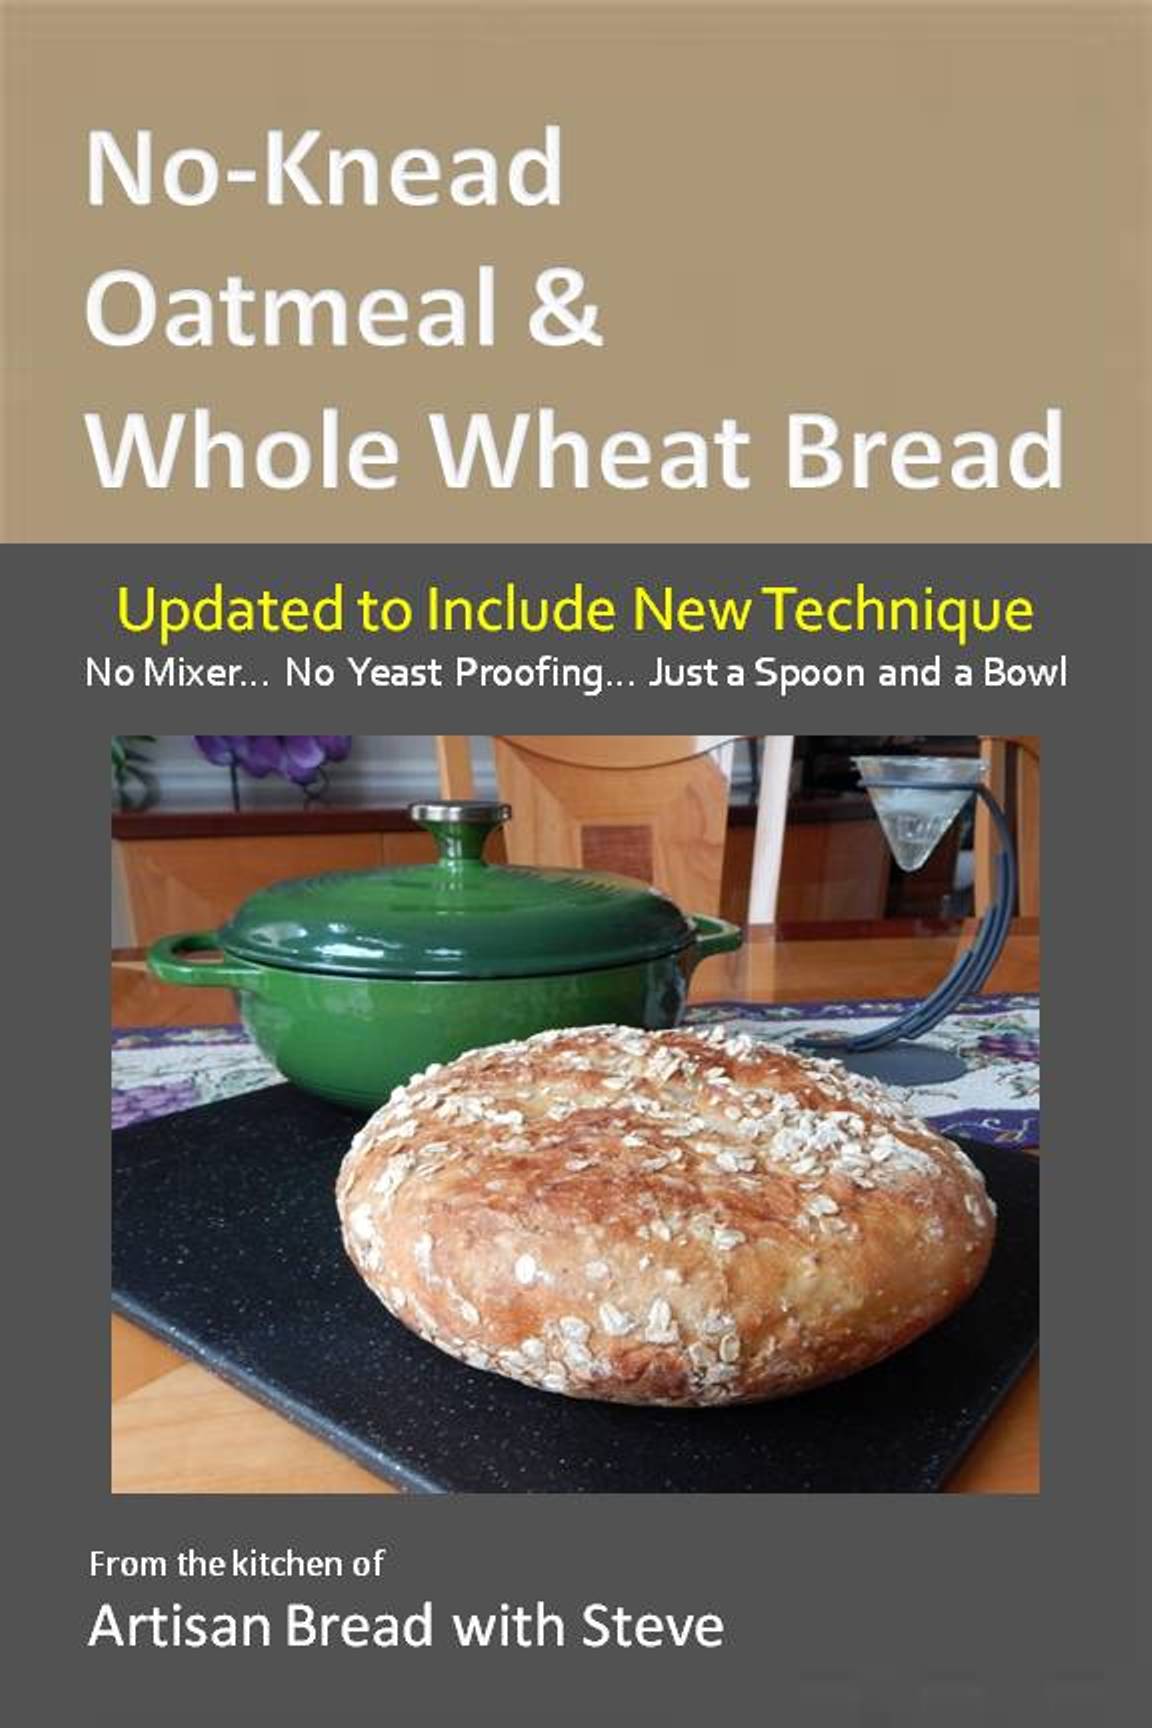 How to Bake No-Knead Bread in a Poor Man's Dutch Oven (no mixer